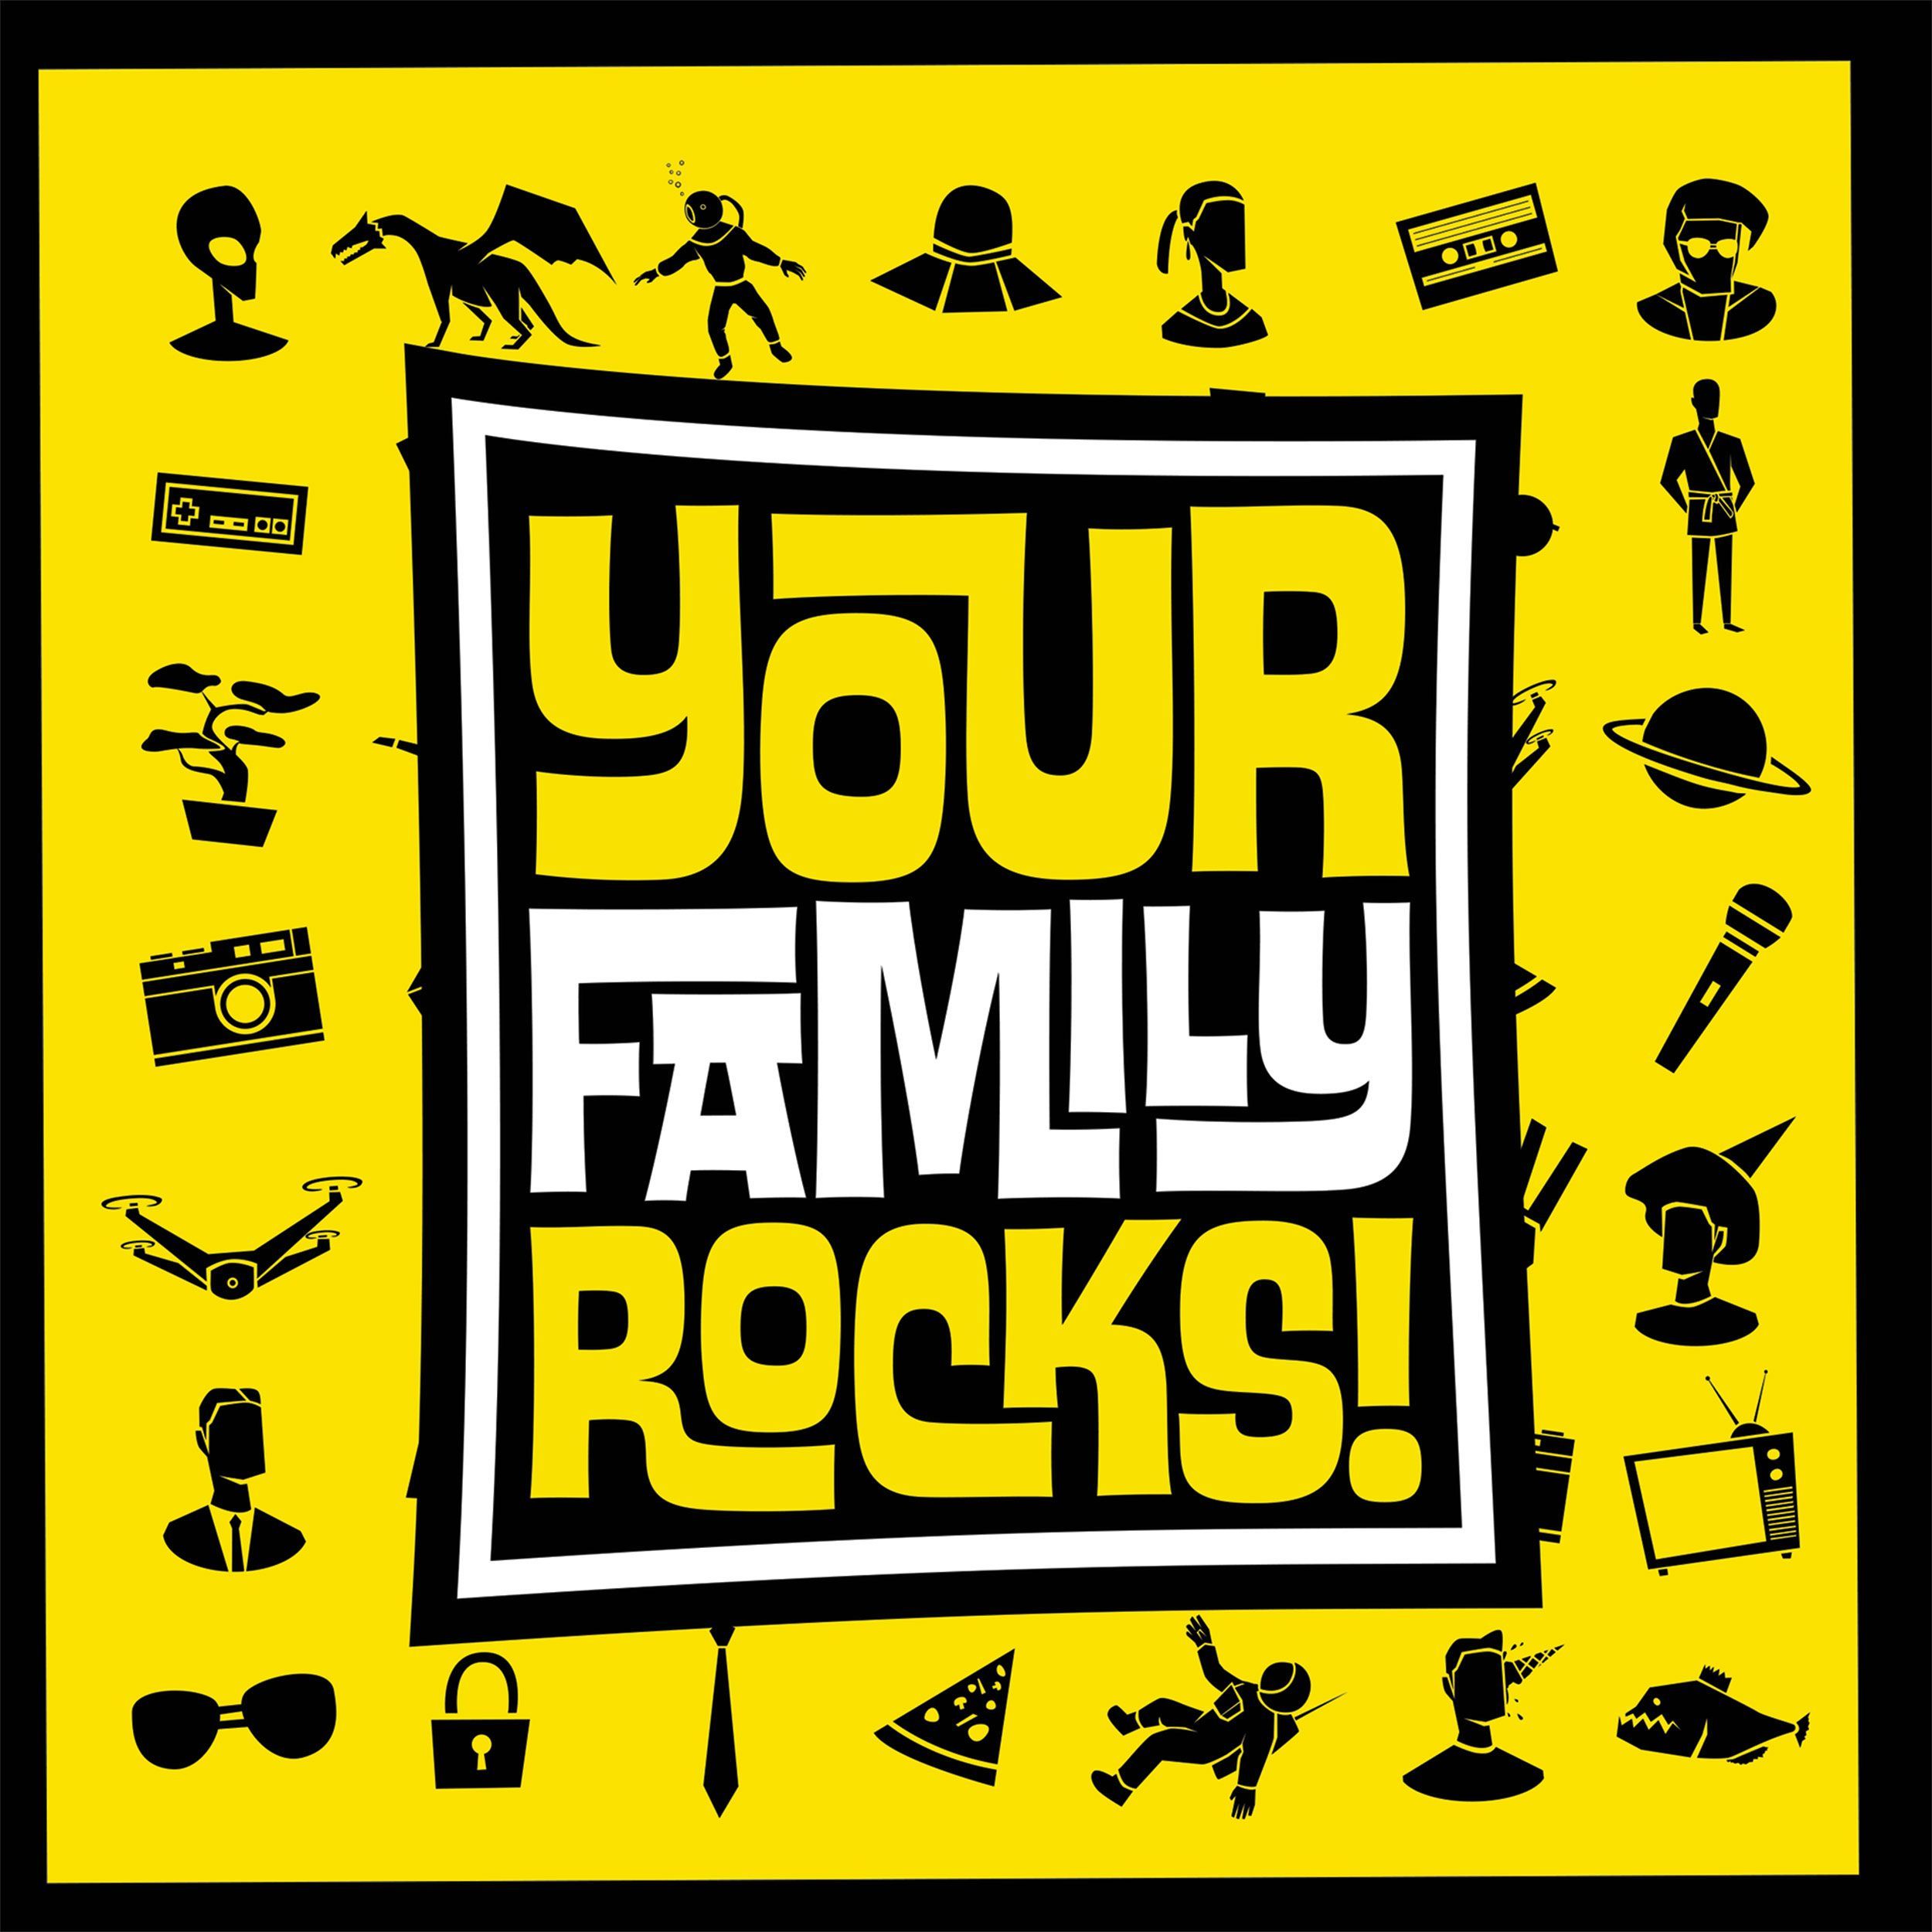 Your Family Rocks!